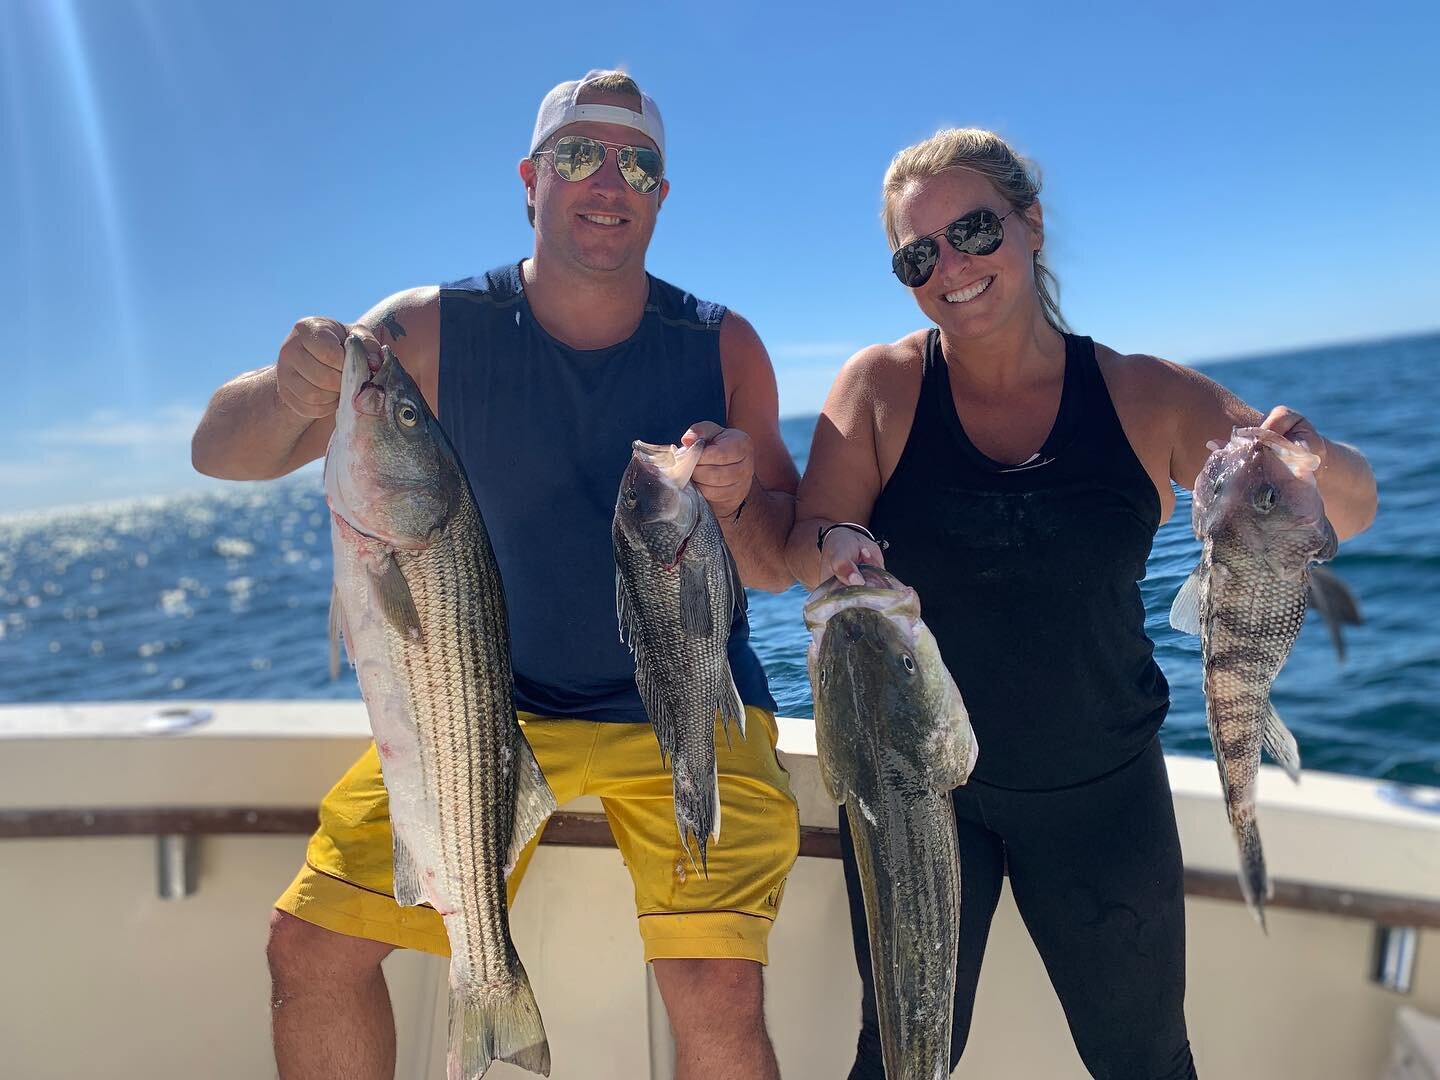 Megan and her Fianc&eacute; had a great day on the water today.  Had a quick limit of bass then went and caught some delicious seabass for the table!  CSS wishes them a wonderful wedding and marriage!
.
.
.
#captainsethsportfishing #sportfishing #ott